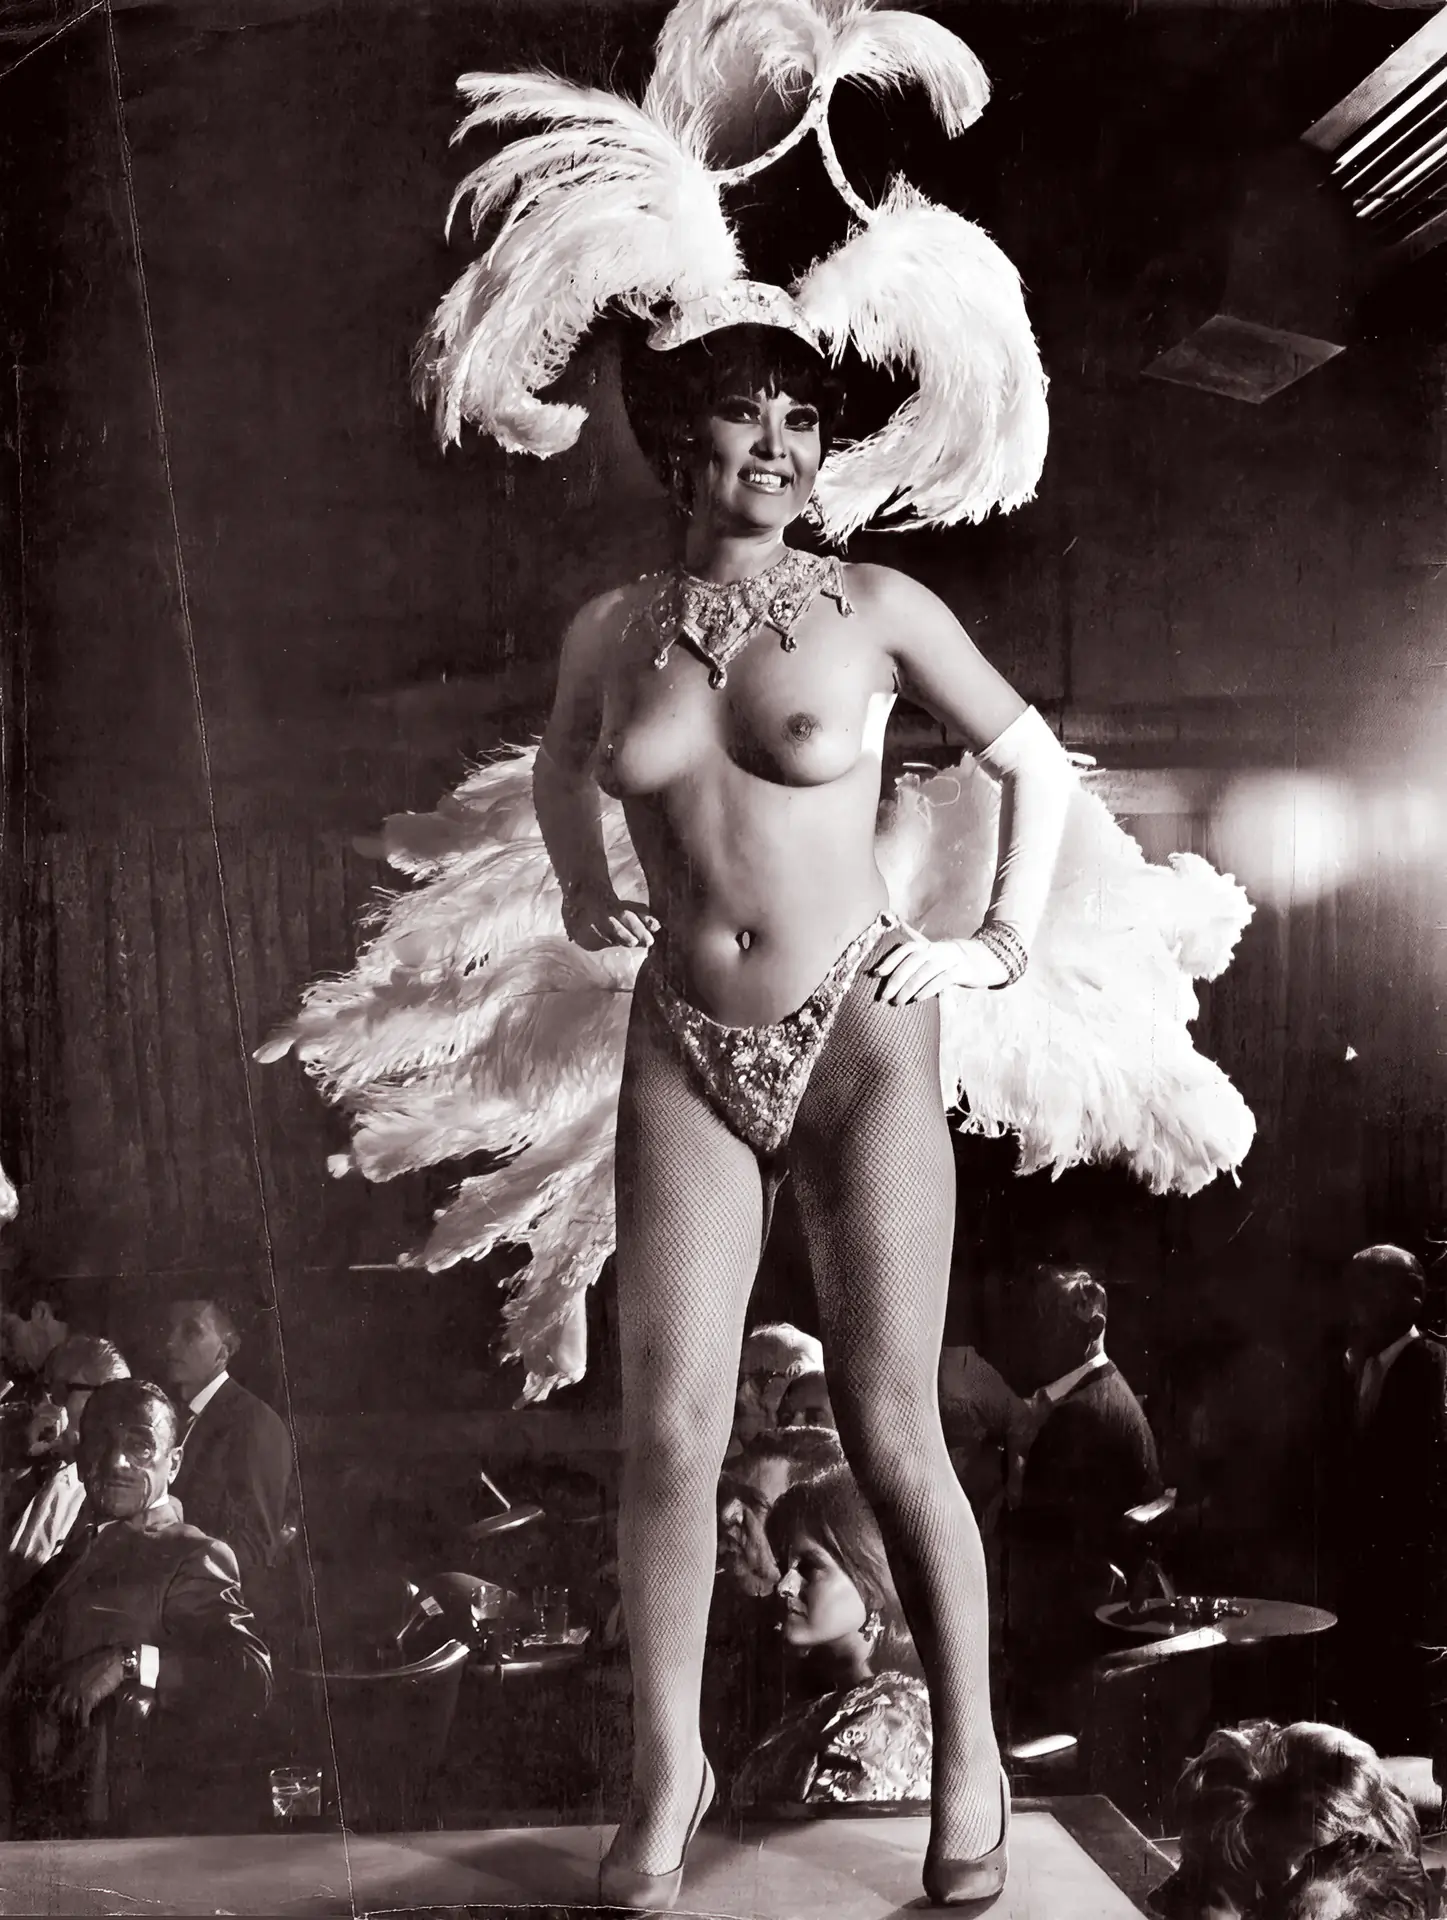 Topless vintage woman shows off her curves in a burlesque costume